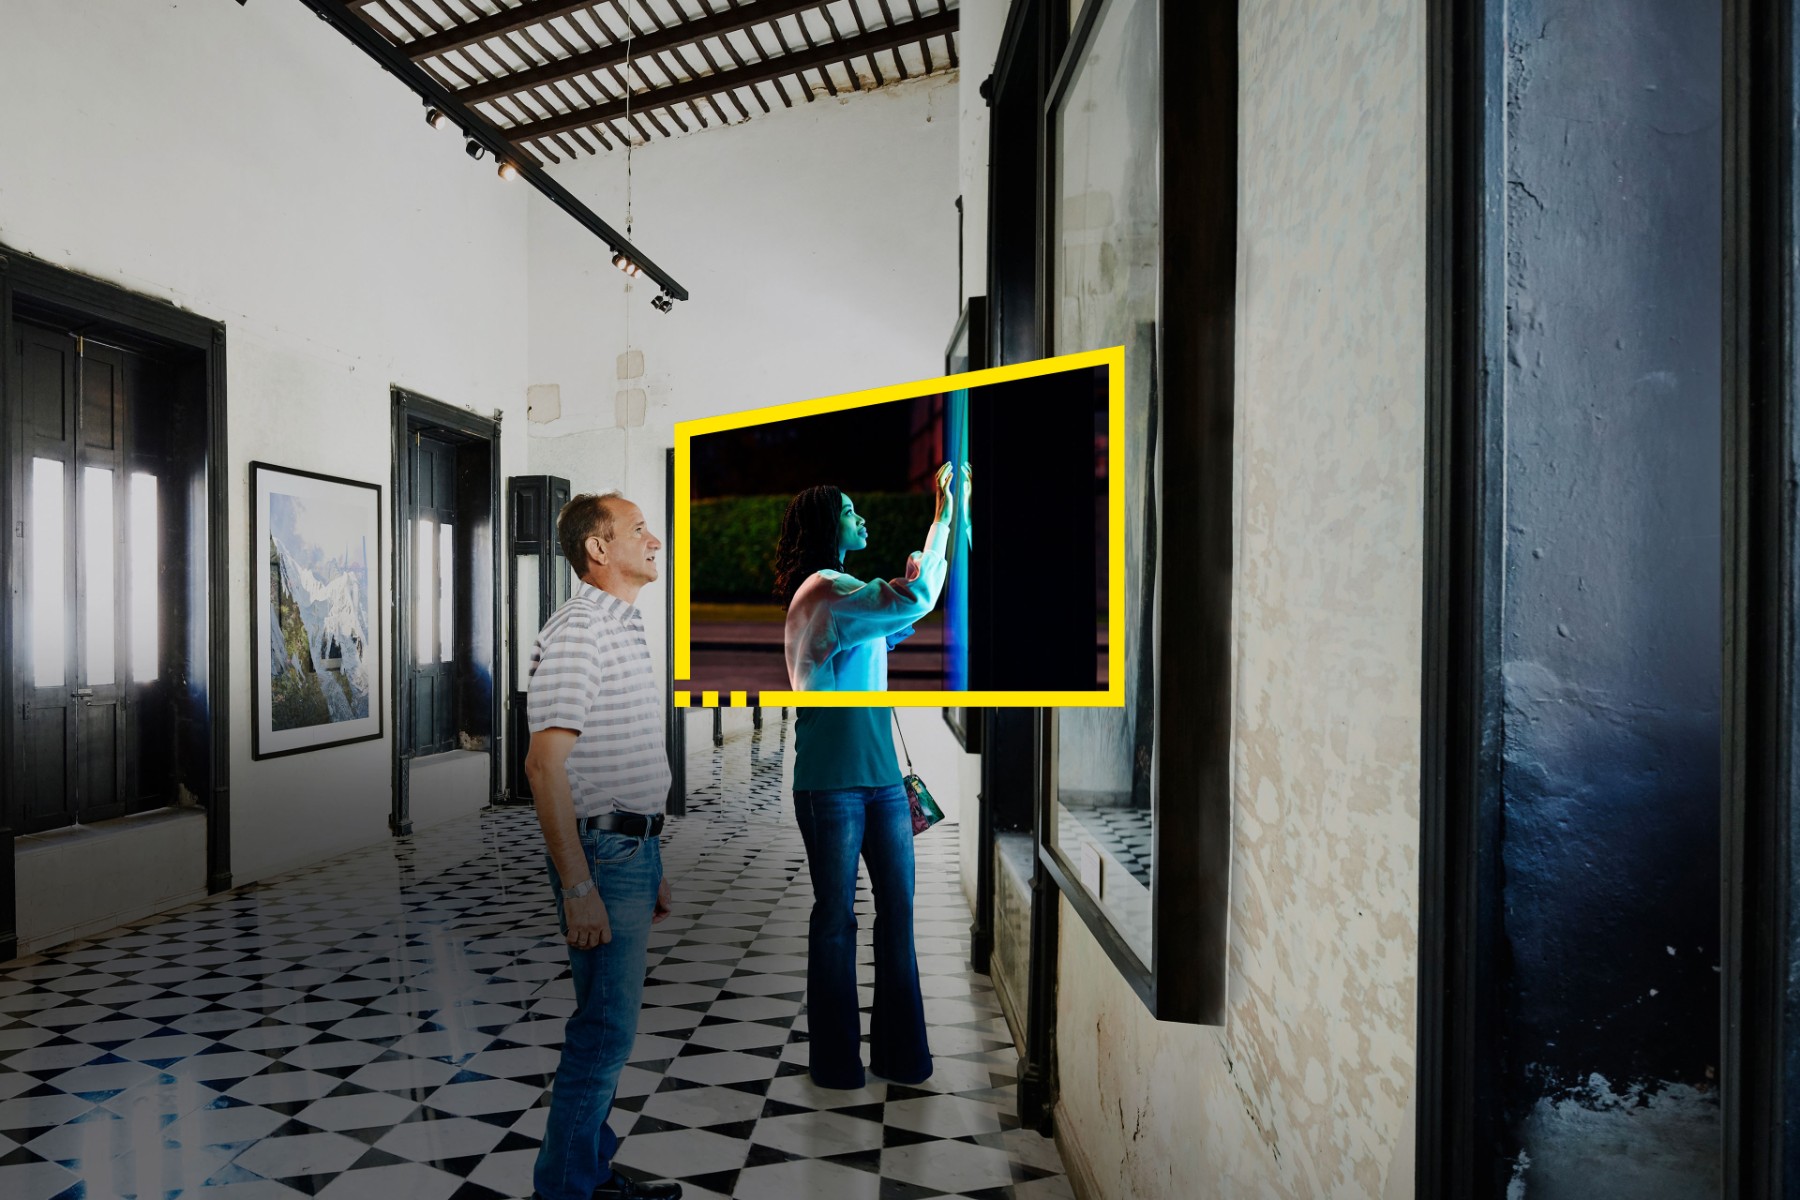 ey-reframe-your-future-art-gallery-touchscreen-static-no-zoom-article.jpg.rendition.1800.1200